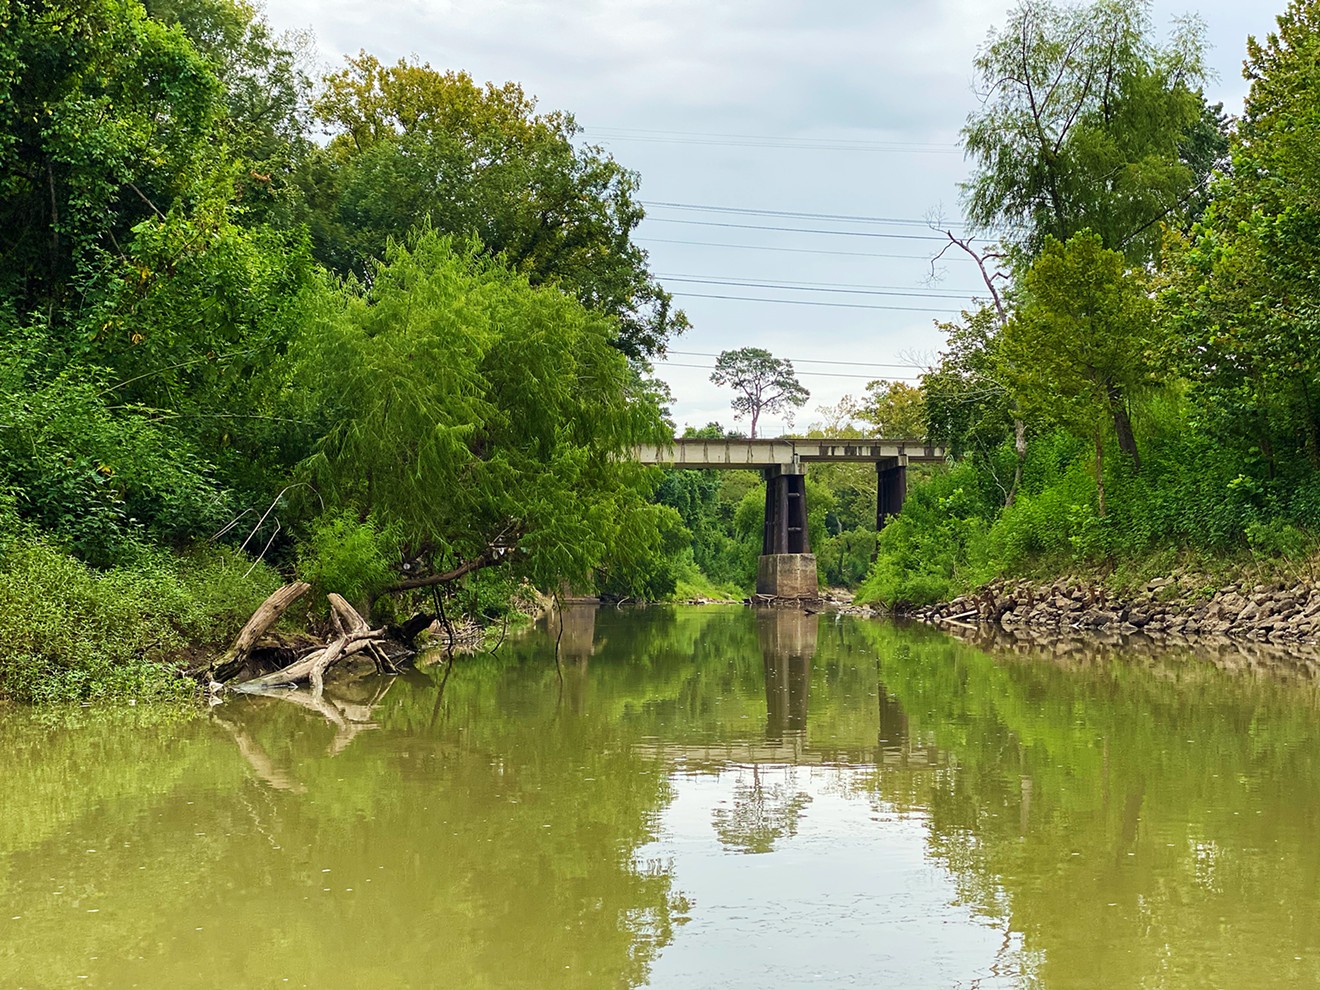 Lush vegetaiton, one of the beautiful elements of Buffalo Bayou, could be wiped out.